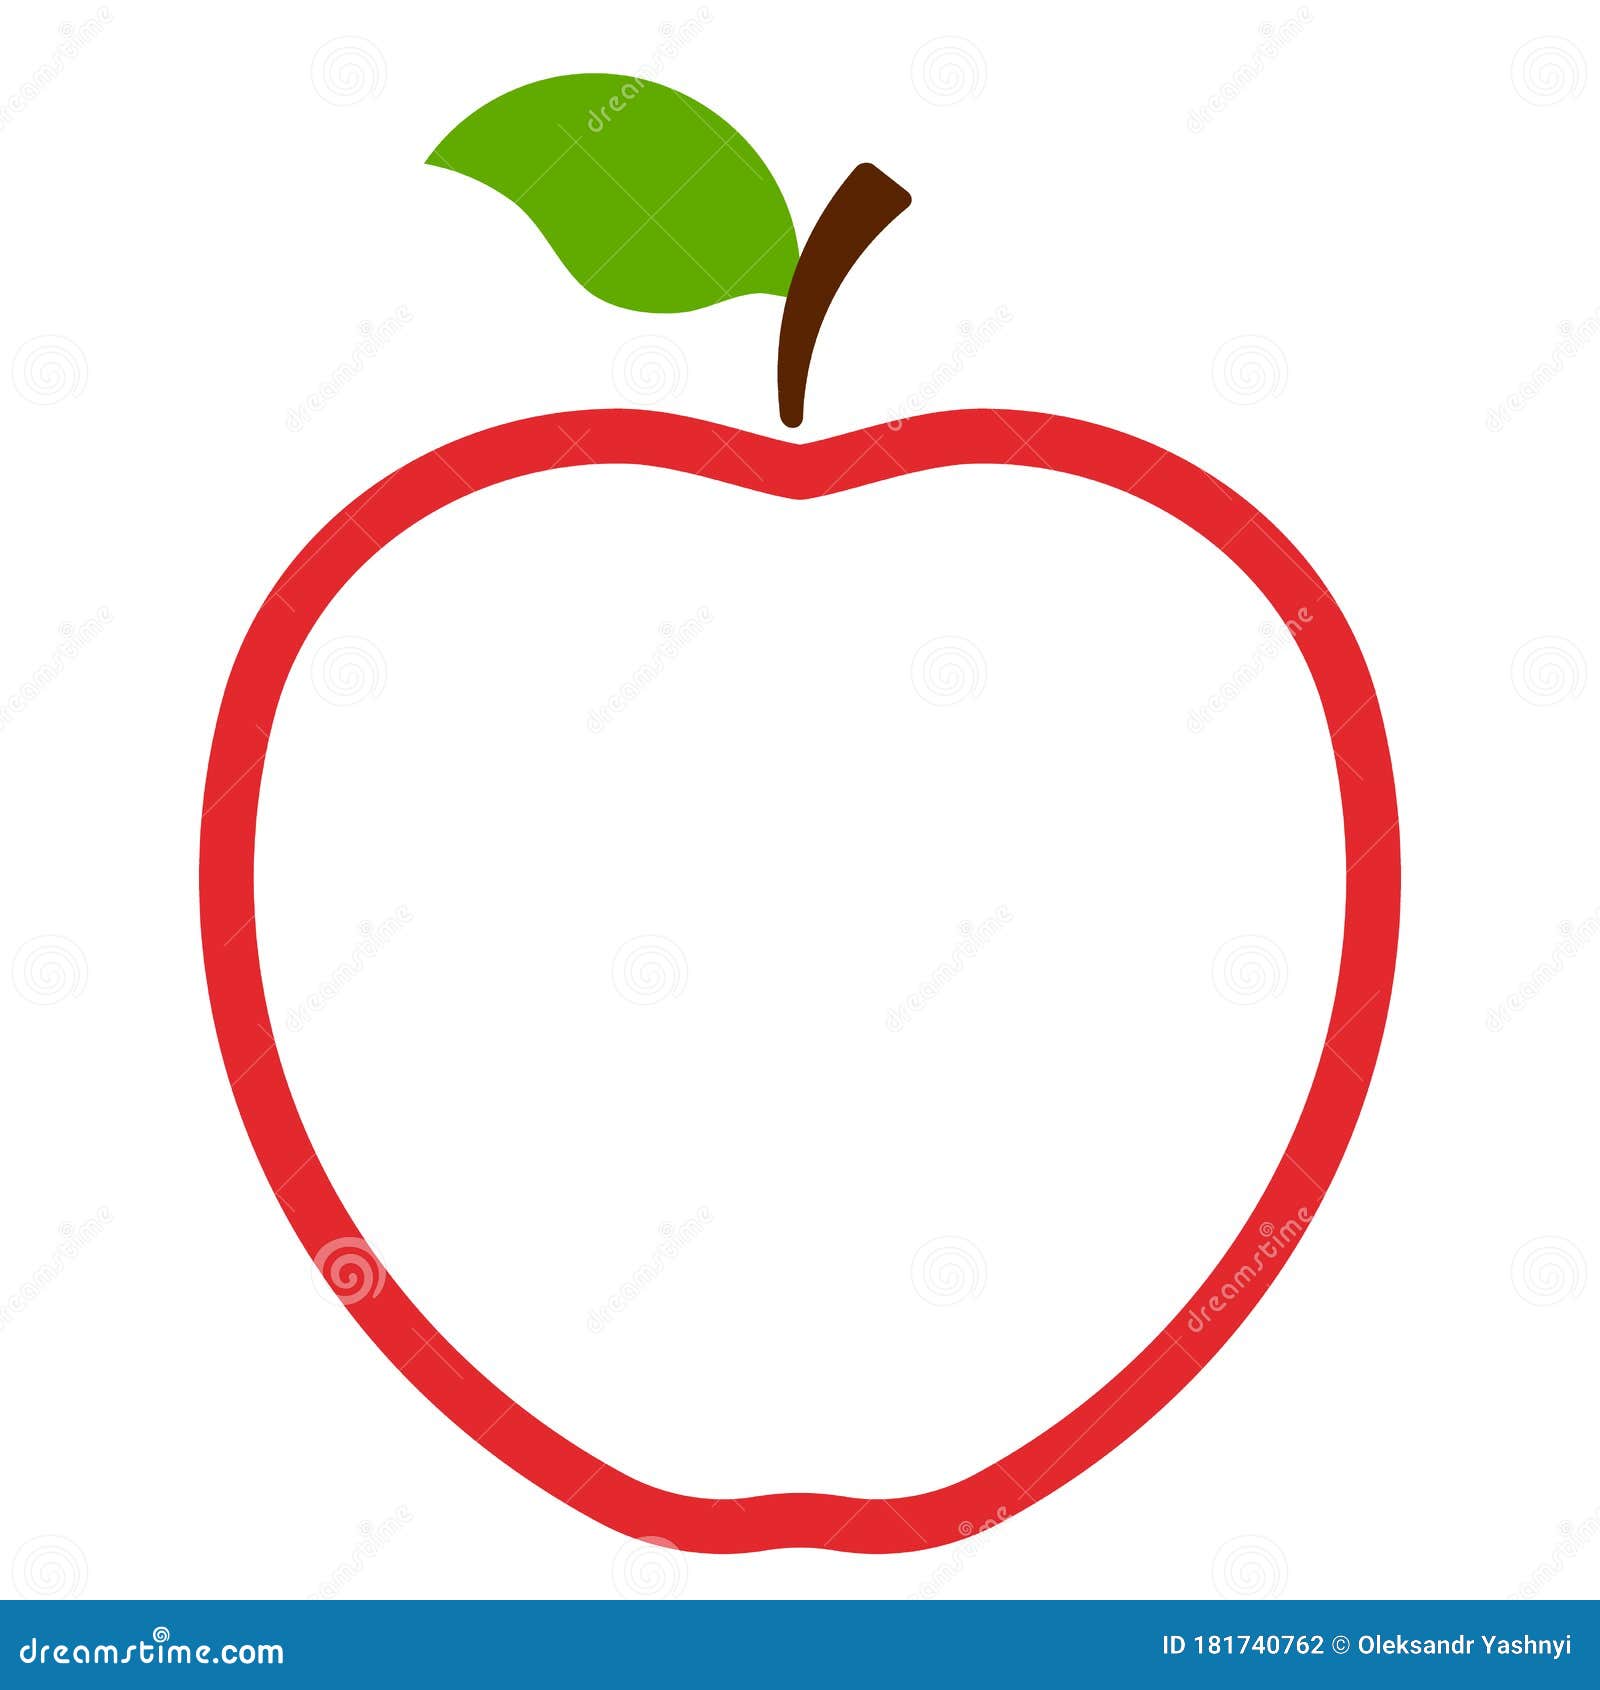 out line picture of apple